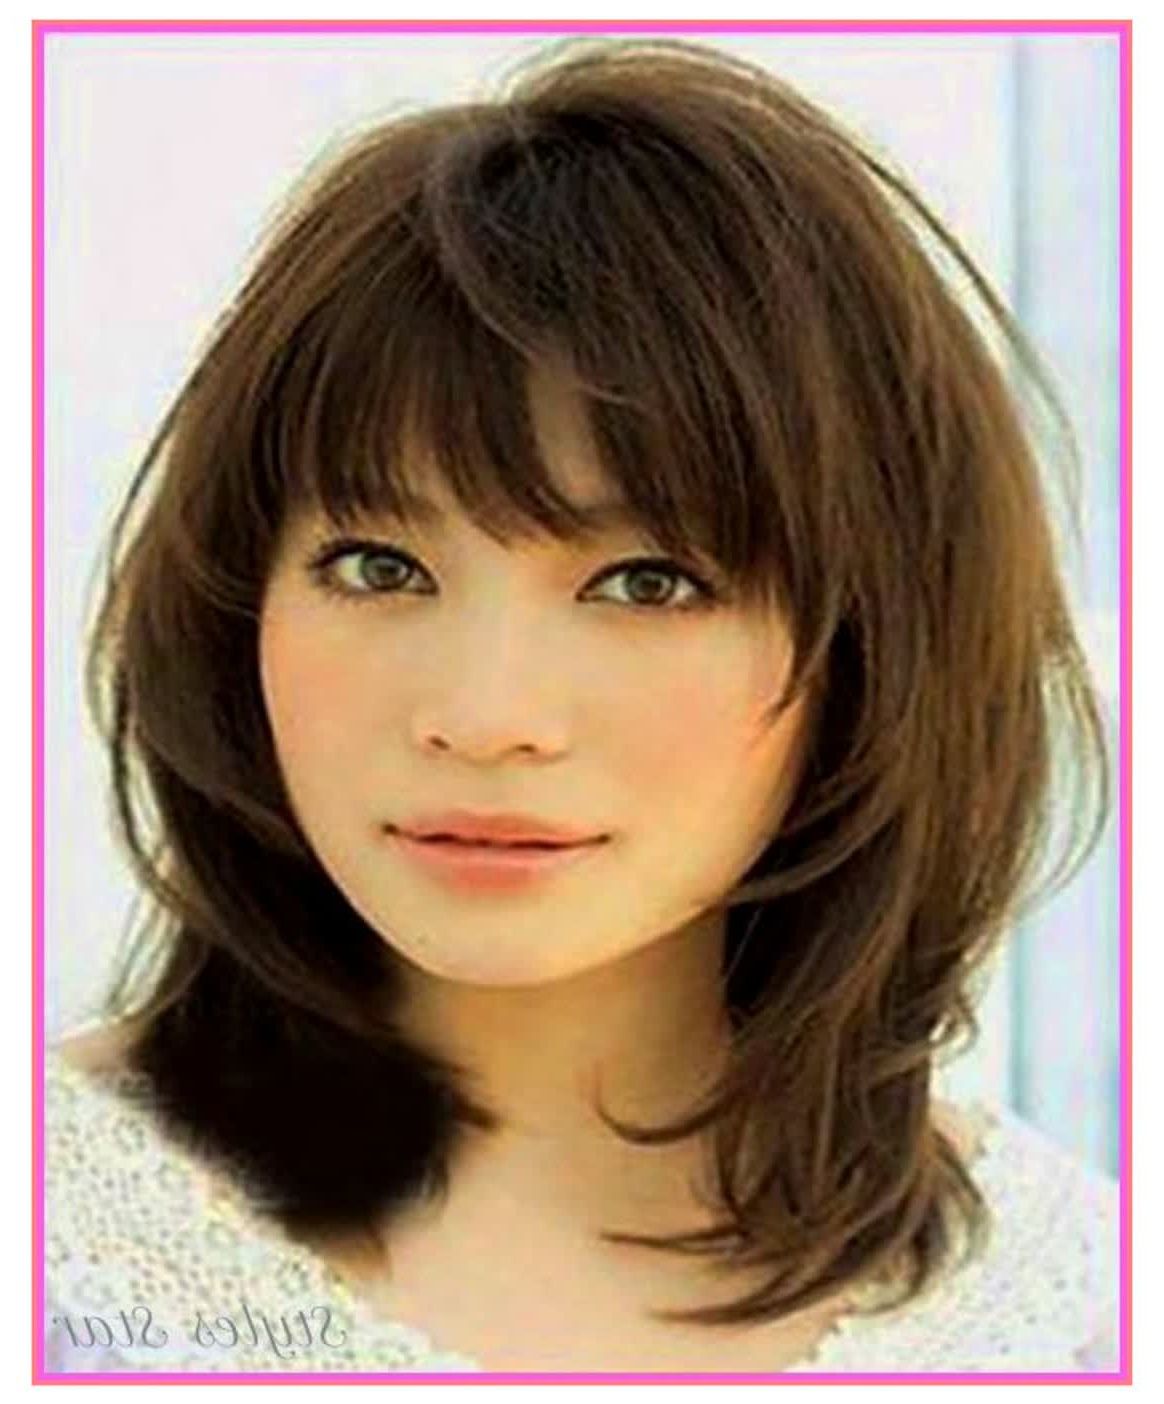 Hair Cuts : Haircuts For Women Over Haircut Near Me With Thin Hair Regarding Latest Medium Hairstyles For Women With Bangs (View 17 of 20)